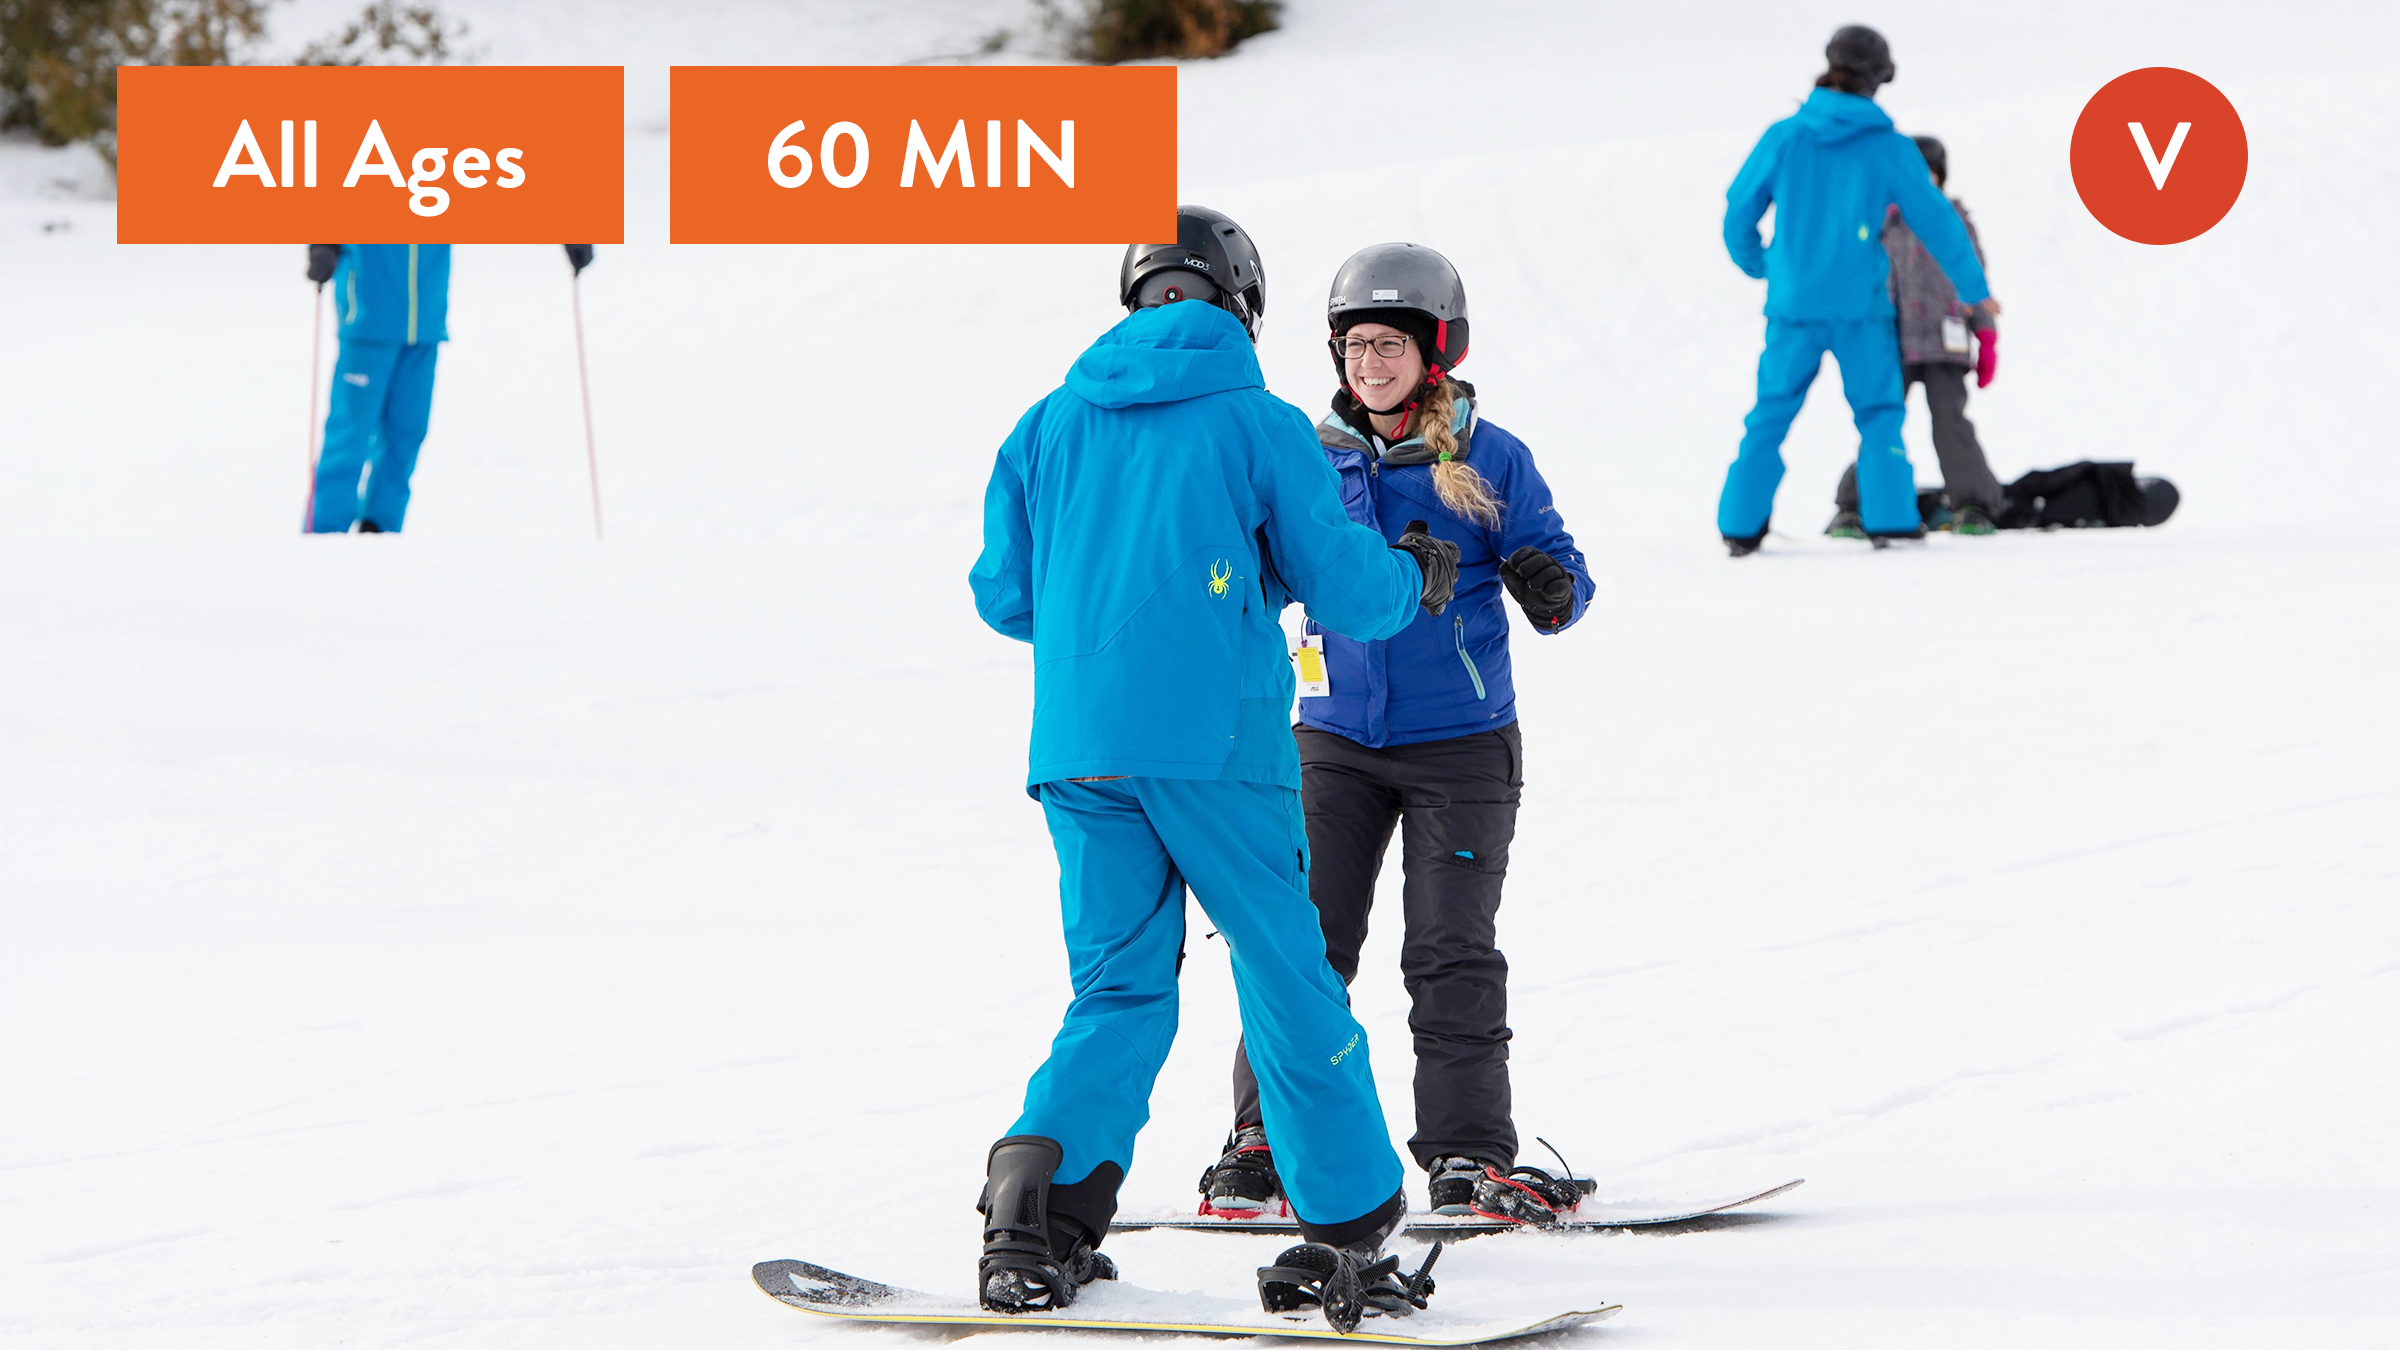 New snowboarder with instructor during Private Snowboard Lessons 60 minutes in Village Blue Mountain